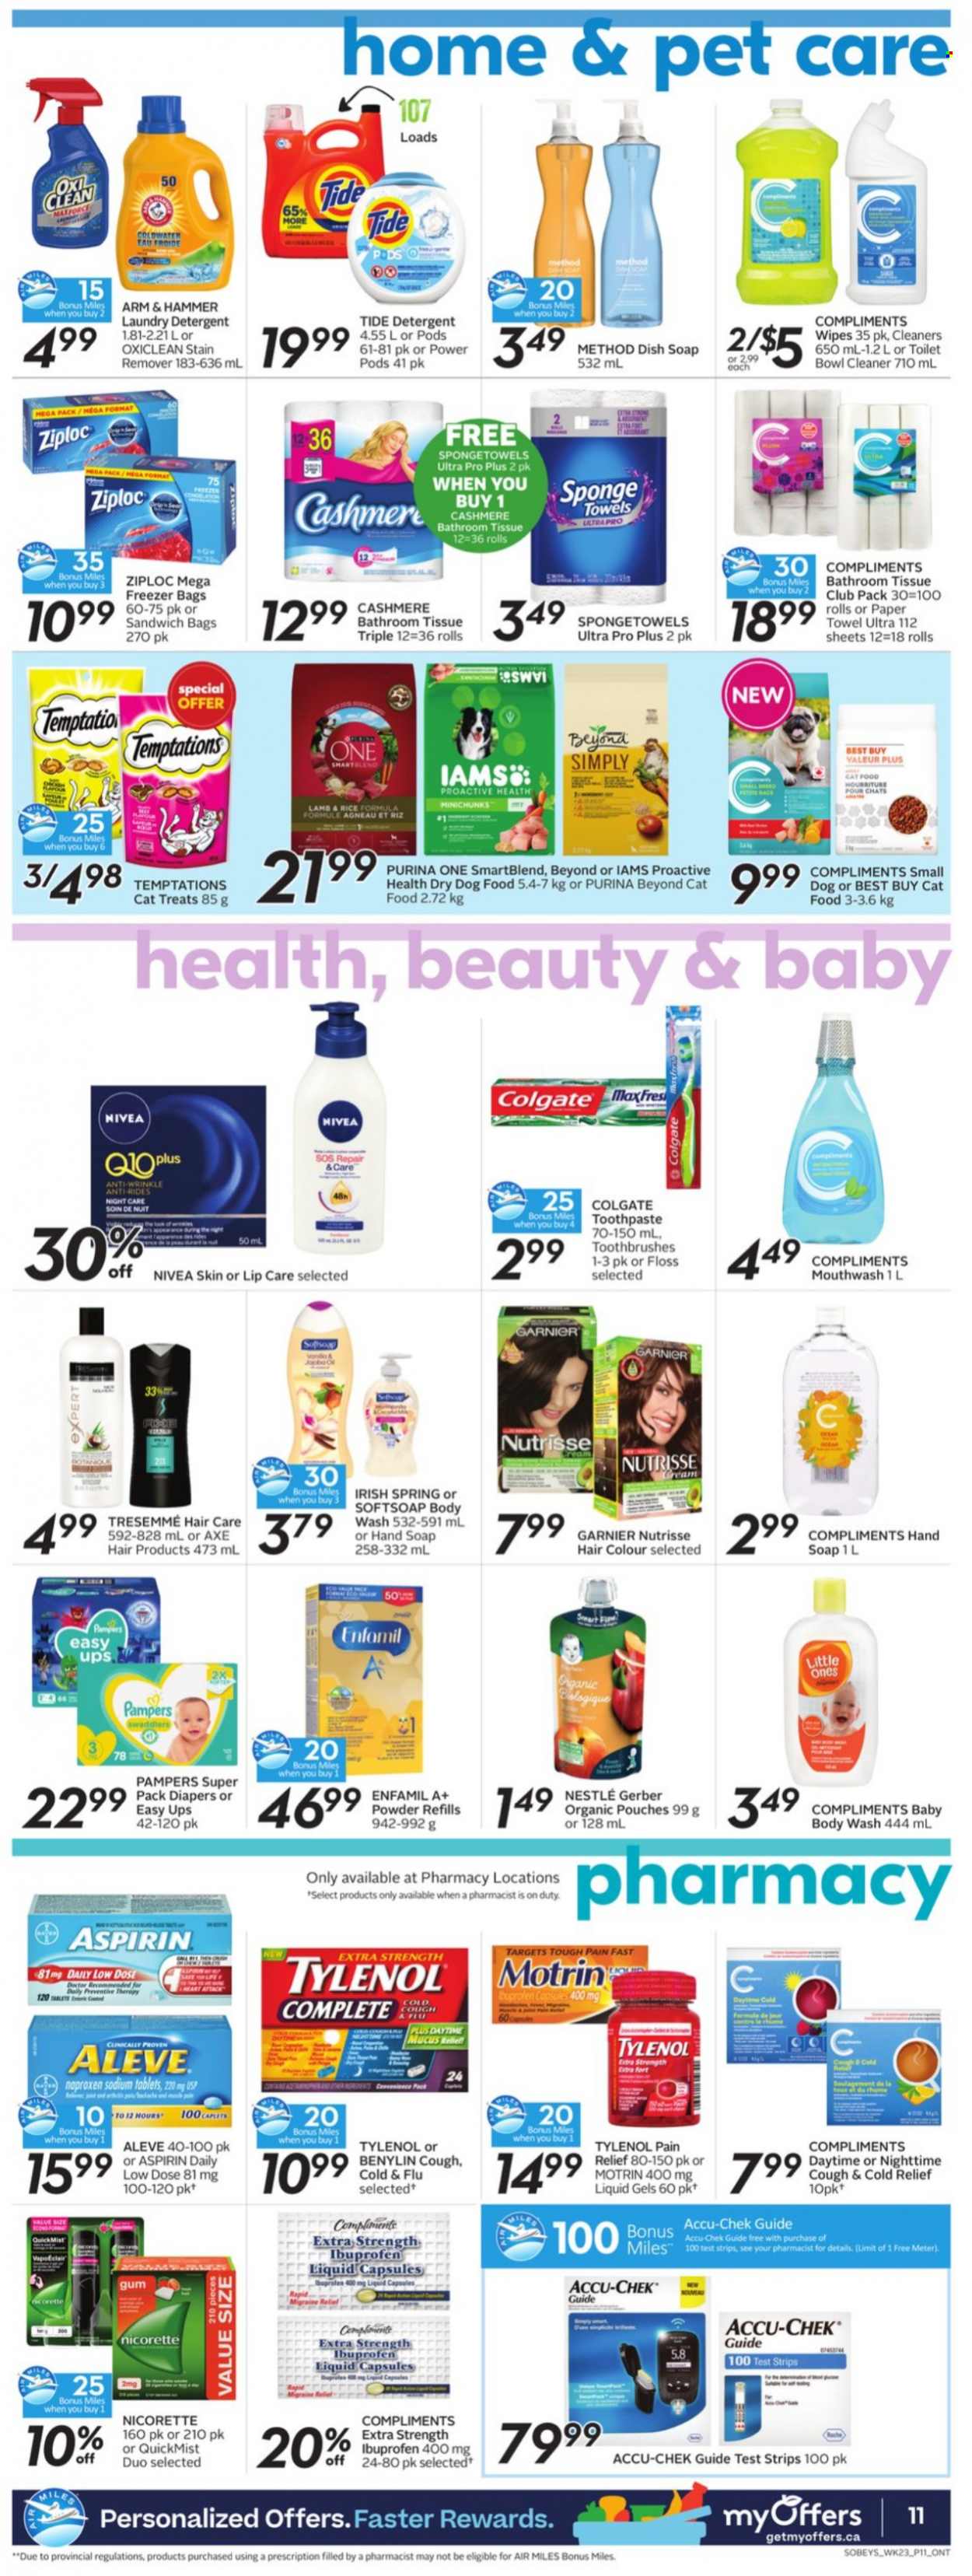 thumbnail - Sobeys Flyer - September 30, 2021 - October 06, 2021 - Sales products - Gerber, ARM & HAMMER, Enfamil, wipes, nappies, bath tissue, paper towels, cleaner, stain remover, OxiClean, Tide, laundry detergent, body wash, Softsoap, hand soap, soap, toothpaste, mouthwash, TRESemmé, hair color, Ziploc, animal food, cat food, dog food, Purina, dry dog food, Iams, pain relief, Aleve, Cold & Flu, Nicorette, Tylenol, Ibuprofen, Low Dose, aspirin, Benylin, Motrin, Nestlé, detergent, Colgate, Garnier, Pampers, Nivea. Page 11.